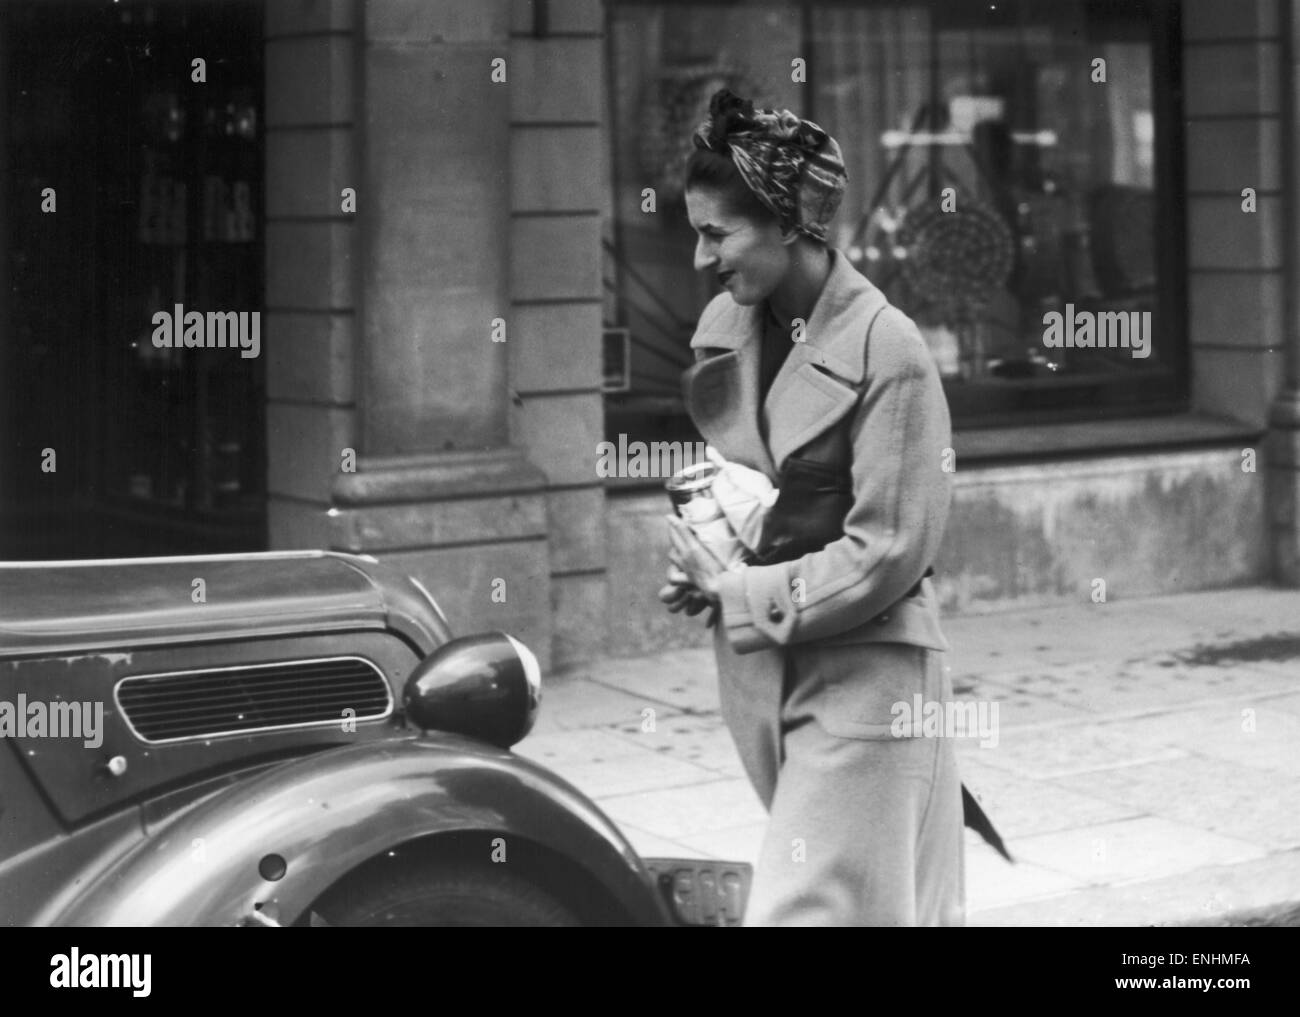 Yvonne Symonds out shopping prior to court hearings Circa 1st September 1946. 19-year-old Yvonne Symonds met Neville Heath at a dance in Chelsea. Heath called himself Lt. Colonel Heath. They agreed to meet the next day. They spent the whole day together a Stock Photo